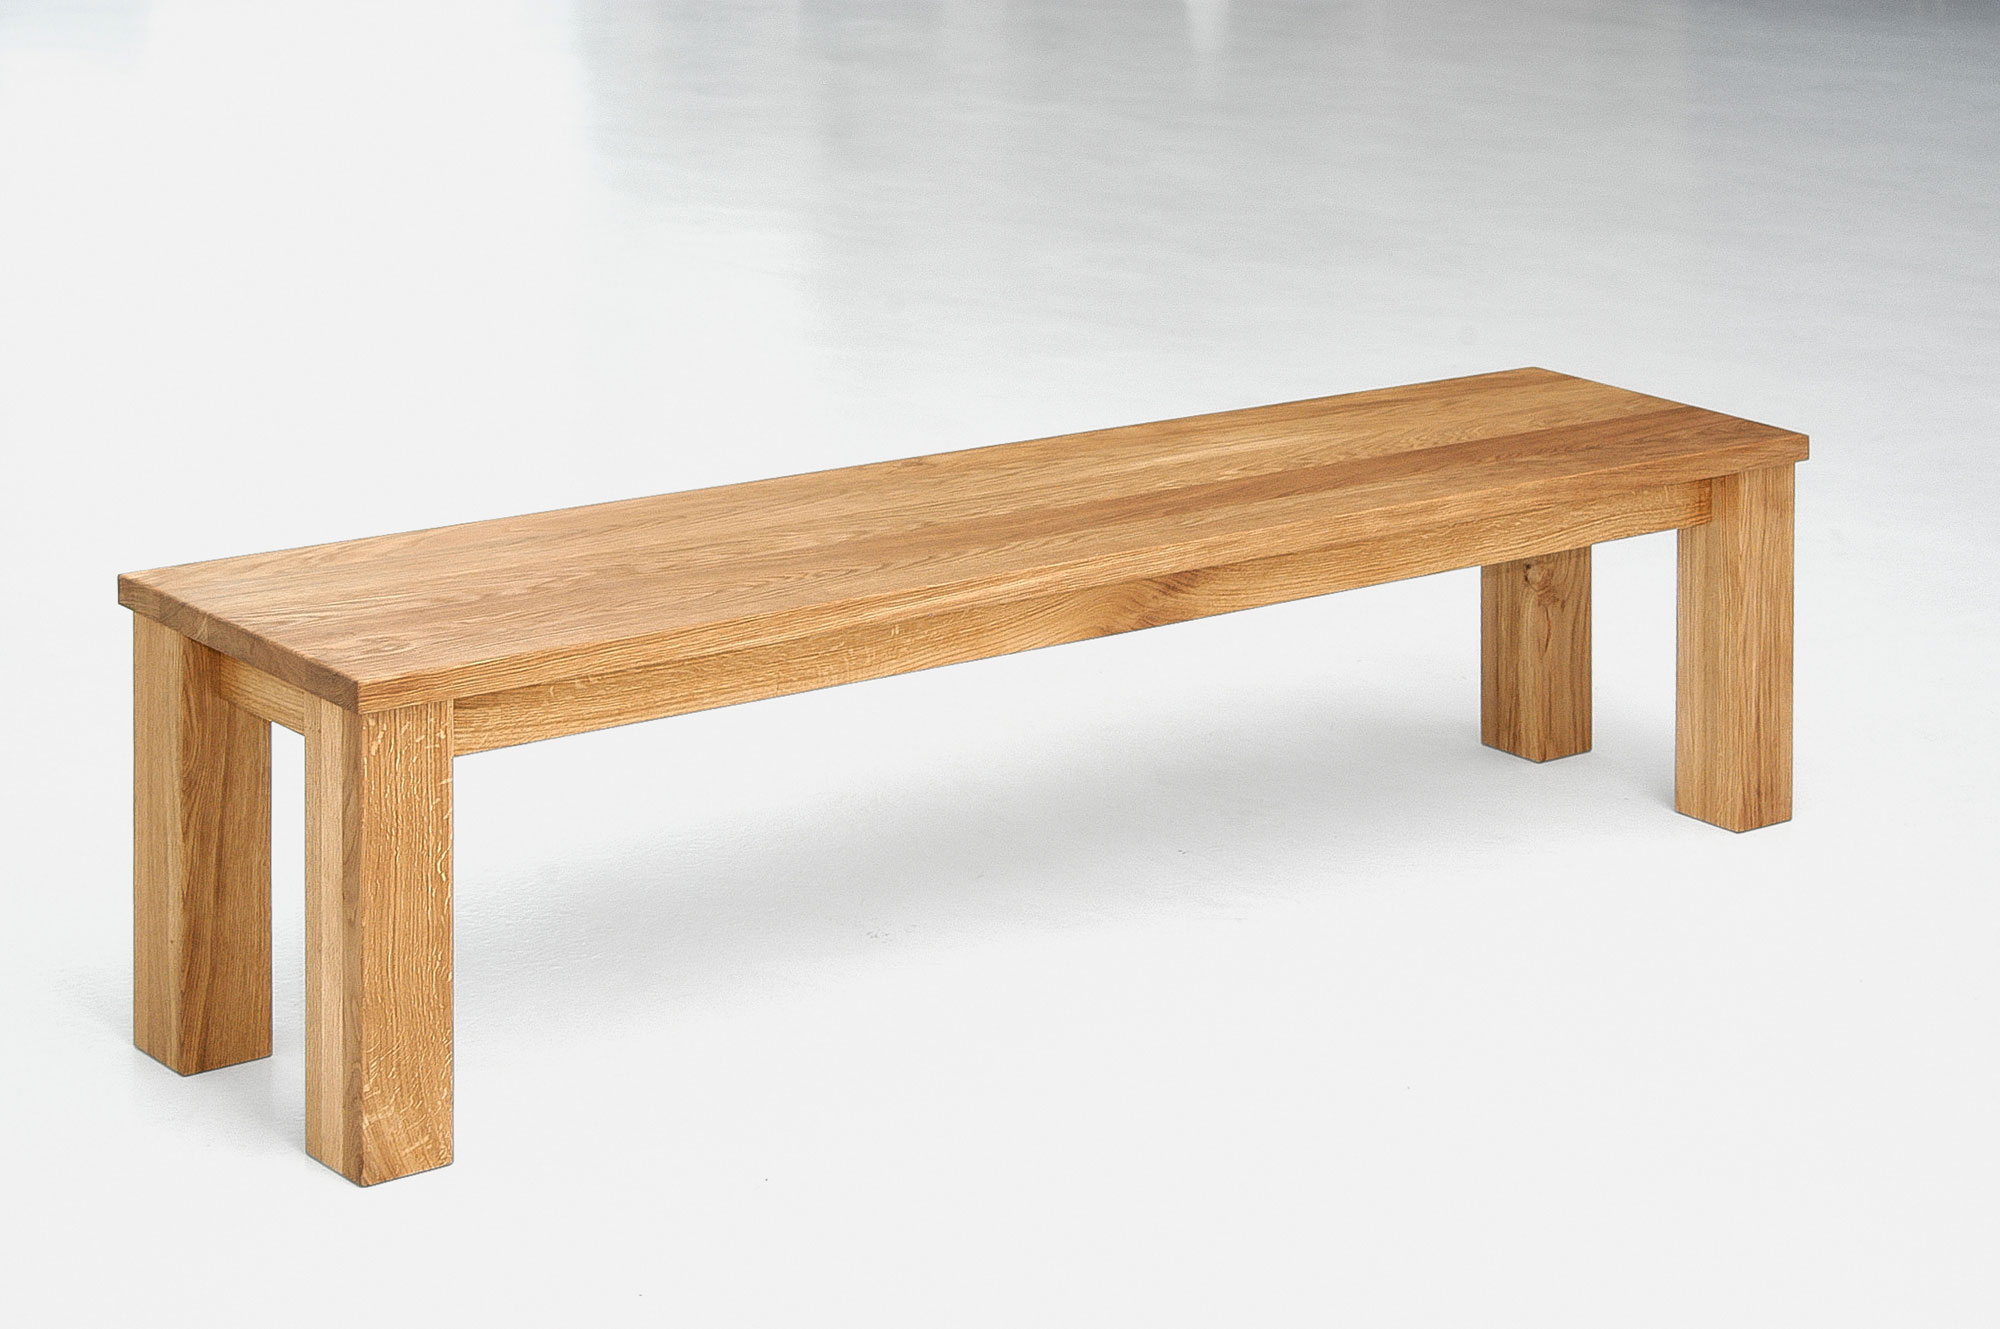 Oak Bench in Solid Wood FORTE 3 0212 custom made in solid wood by vitamin design